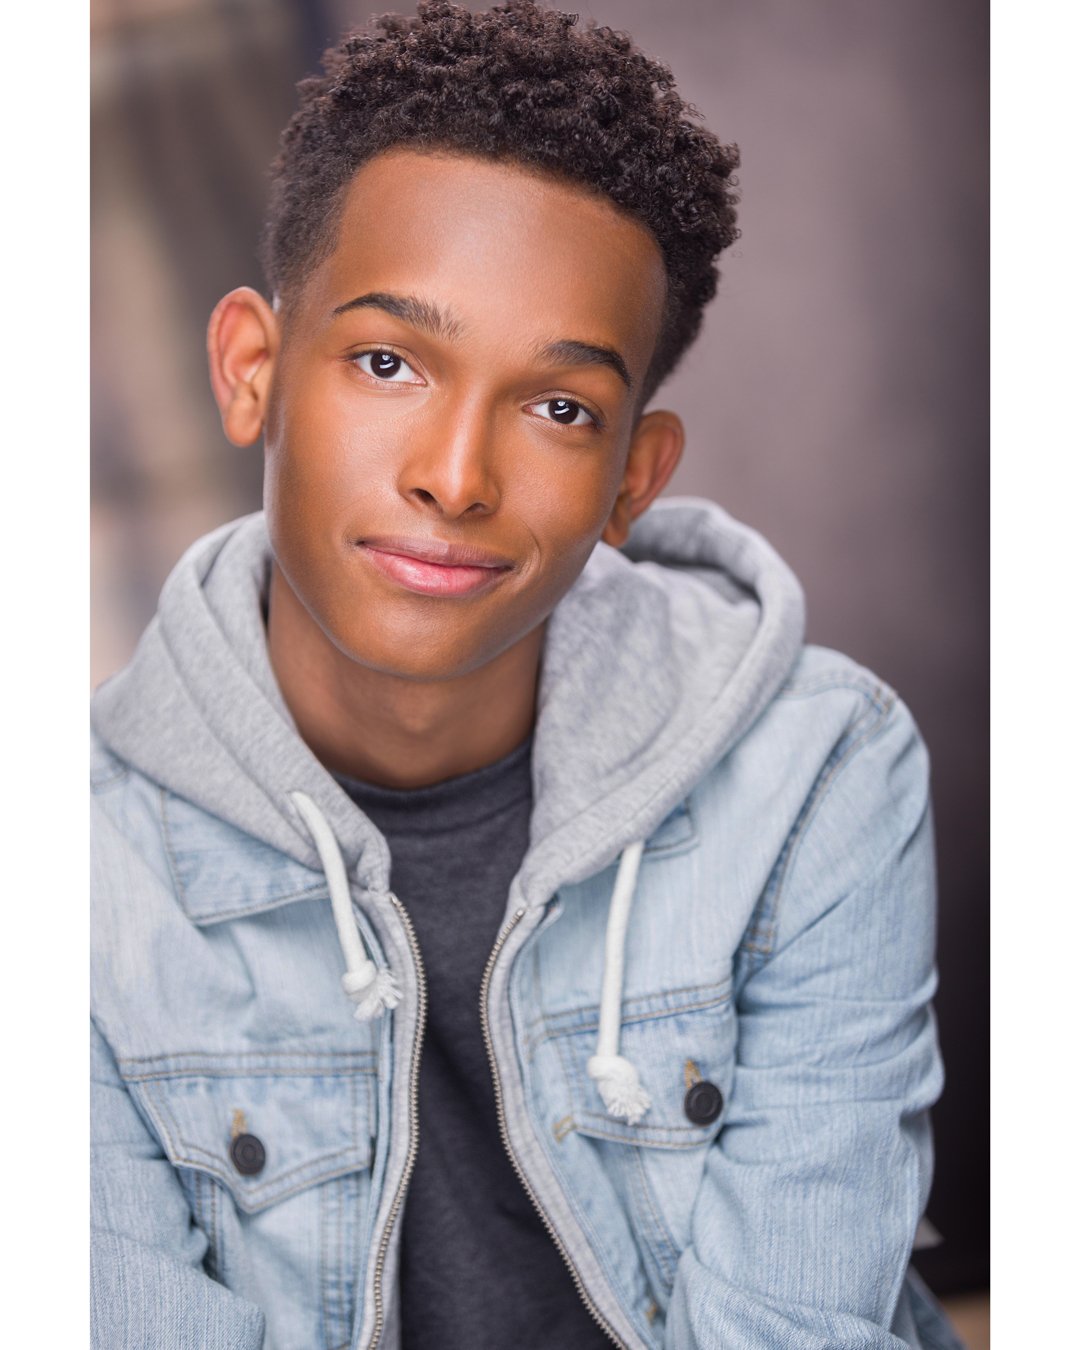 One of my favorite people to work with. The extremely talented Kyan! @kyansamuelsofficial 

Let Me Help You Get In The Room! (or wherever you tape your auditions!)

Headshots for Actors &amp; Creatives
Los Angeles, California

Kid/Youth Headshots:

?